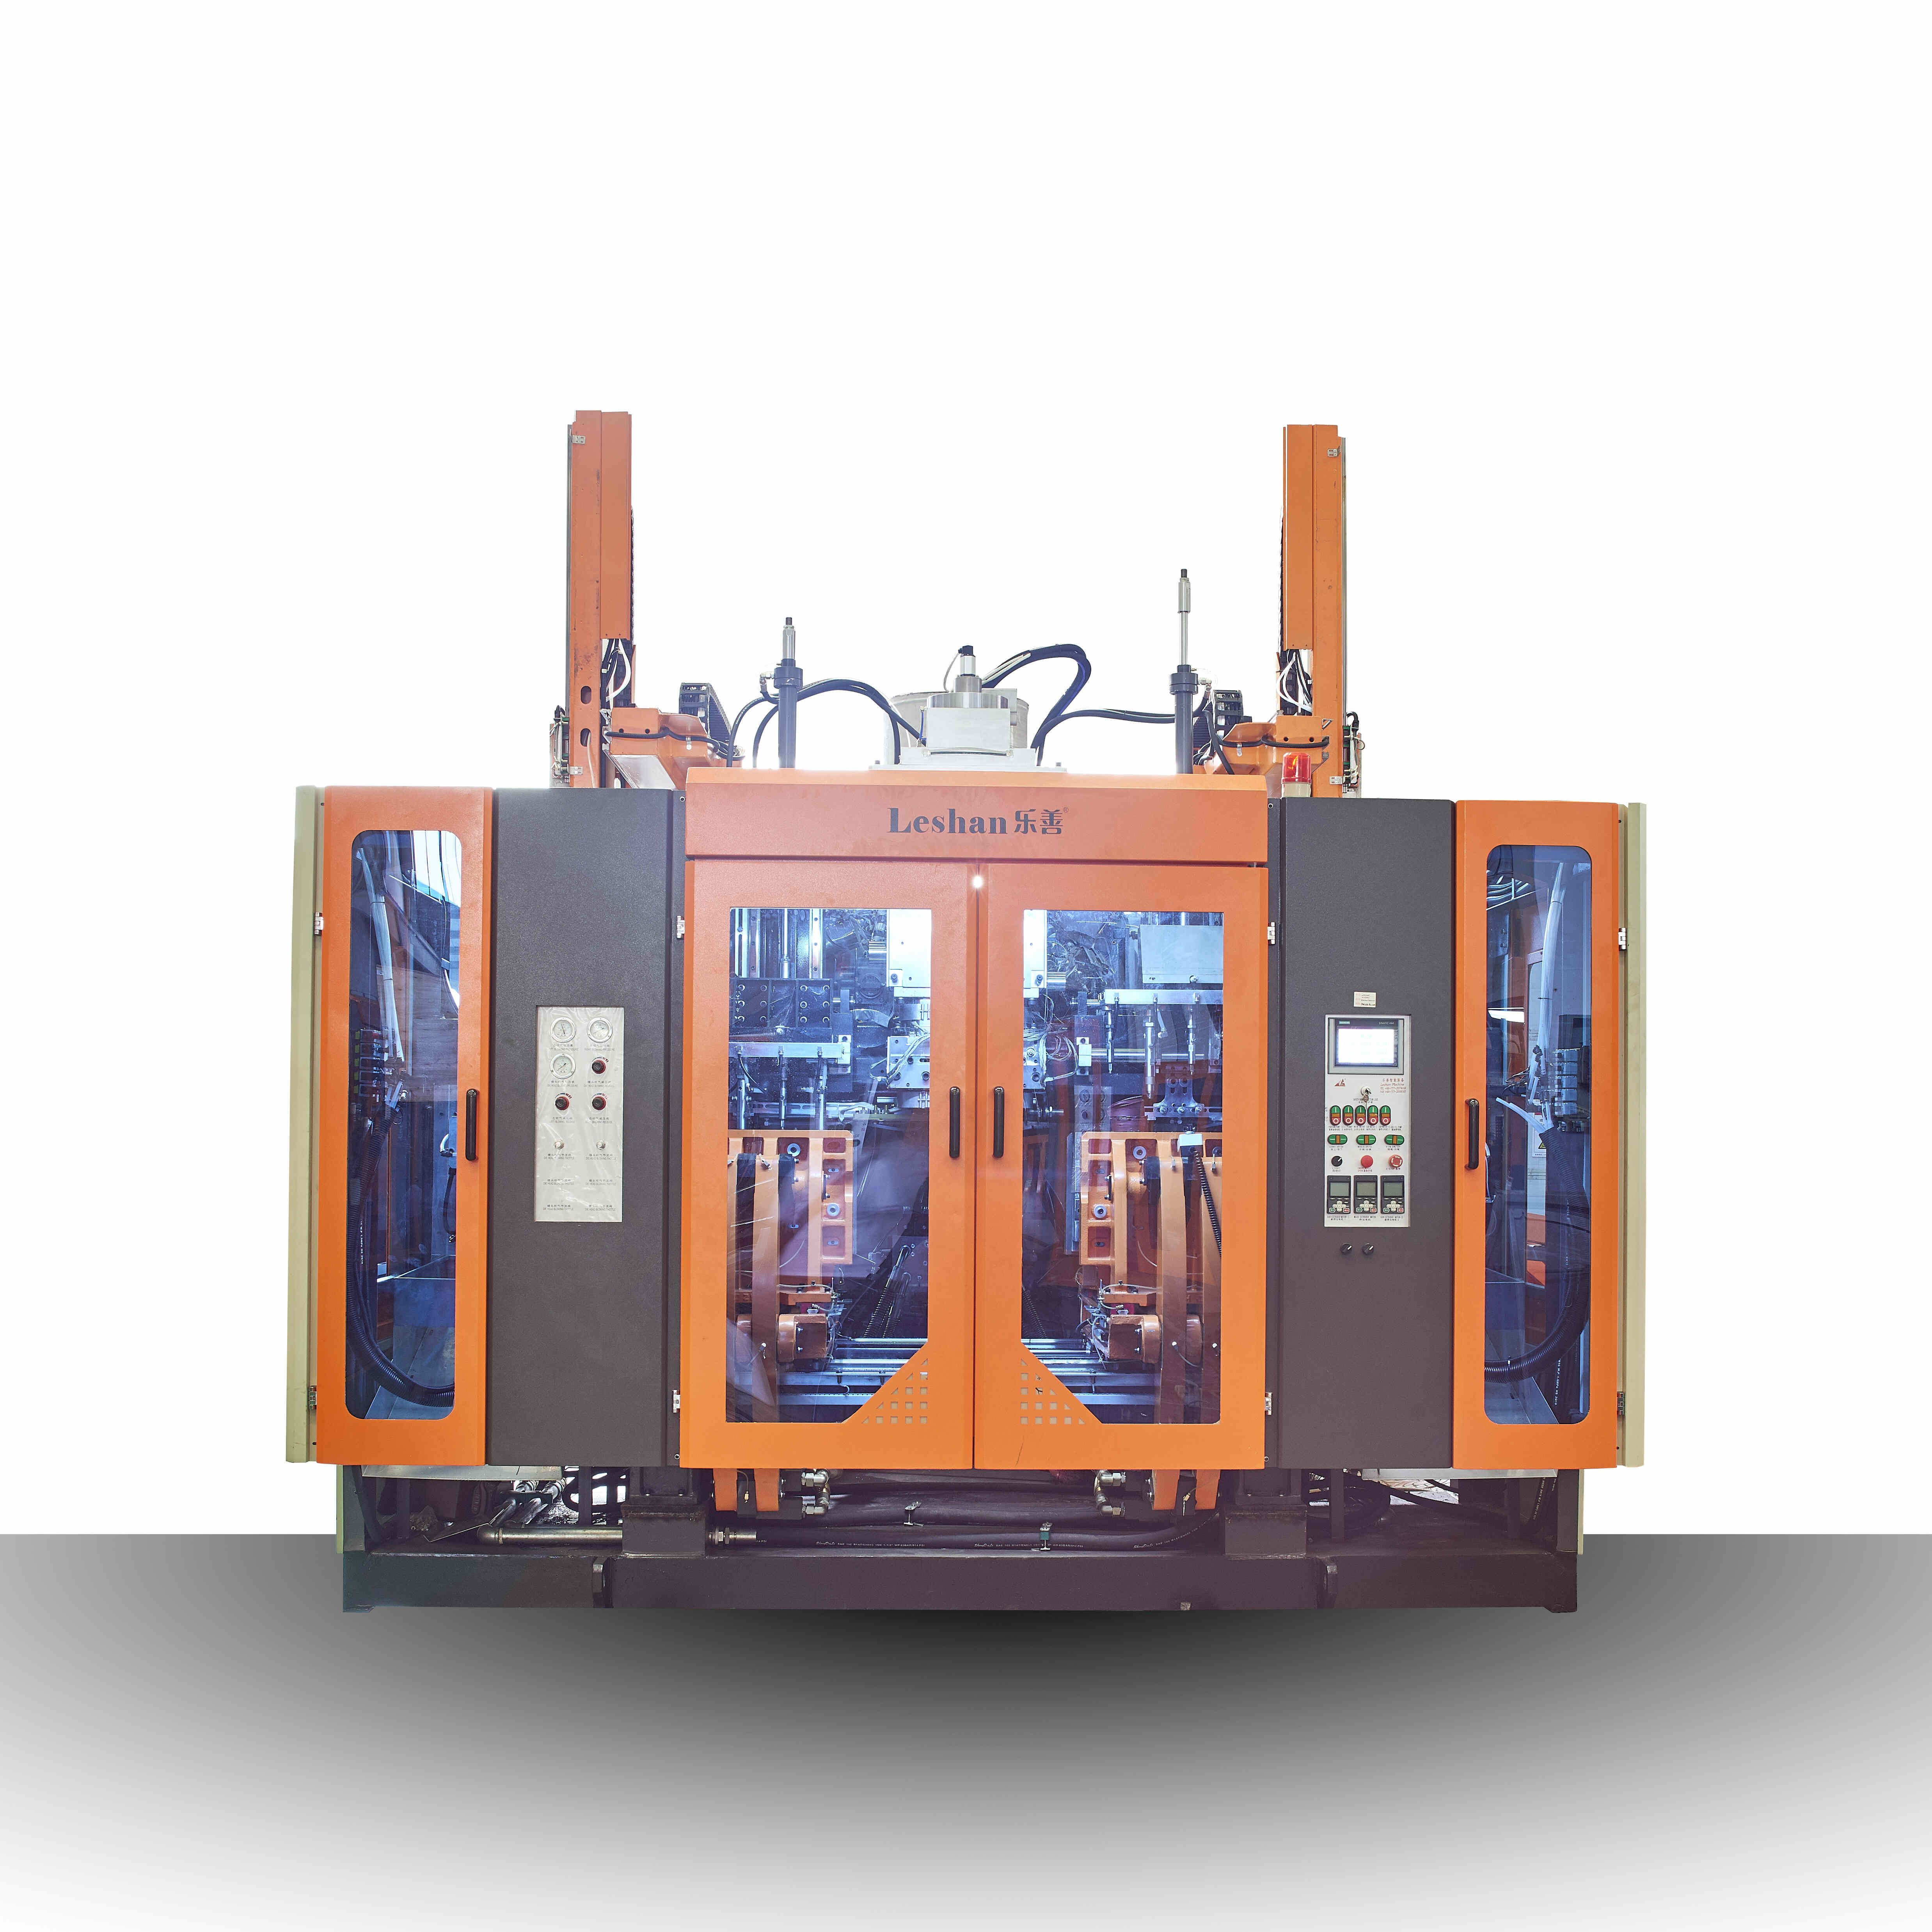 How to solve the malfunction of the big blow molding machines?